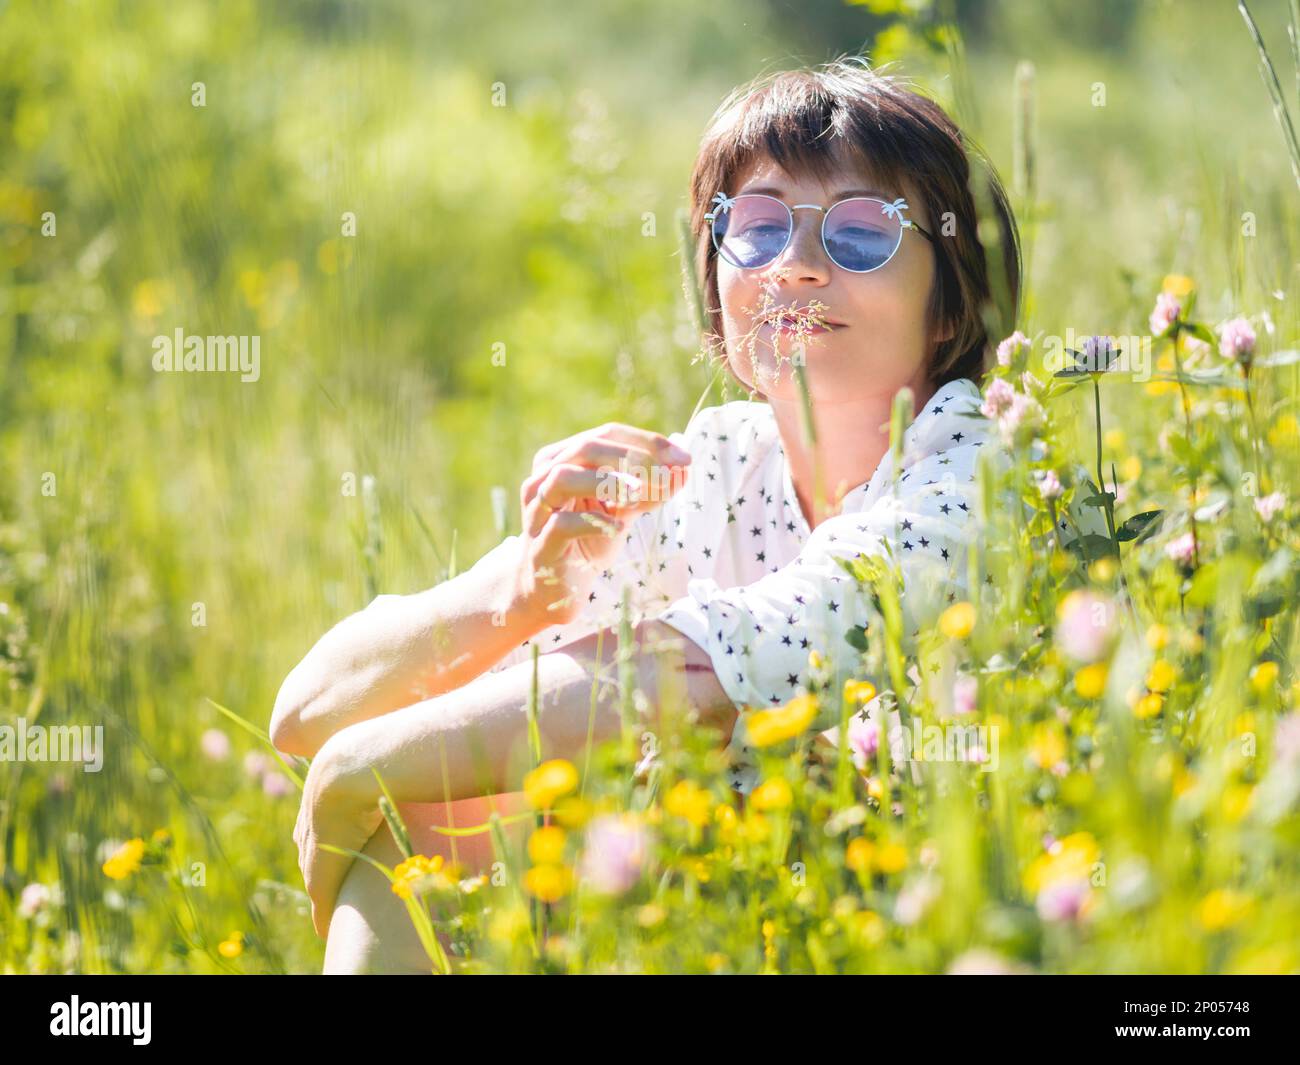 Woman in colorful sunglasses, enjoys sunlight and flower fragrance on grass field. Summer vibes. Relax outdoors. Self-soothing. Stock Photo